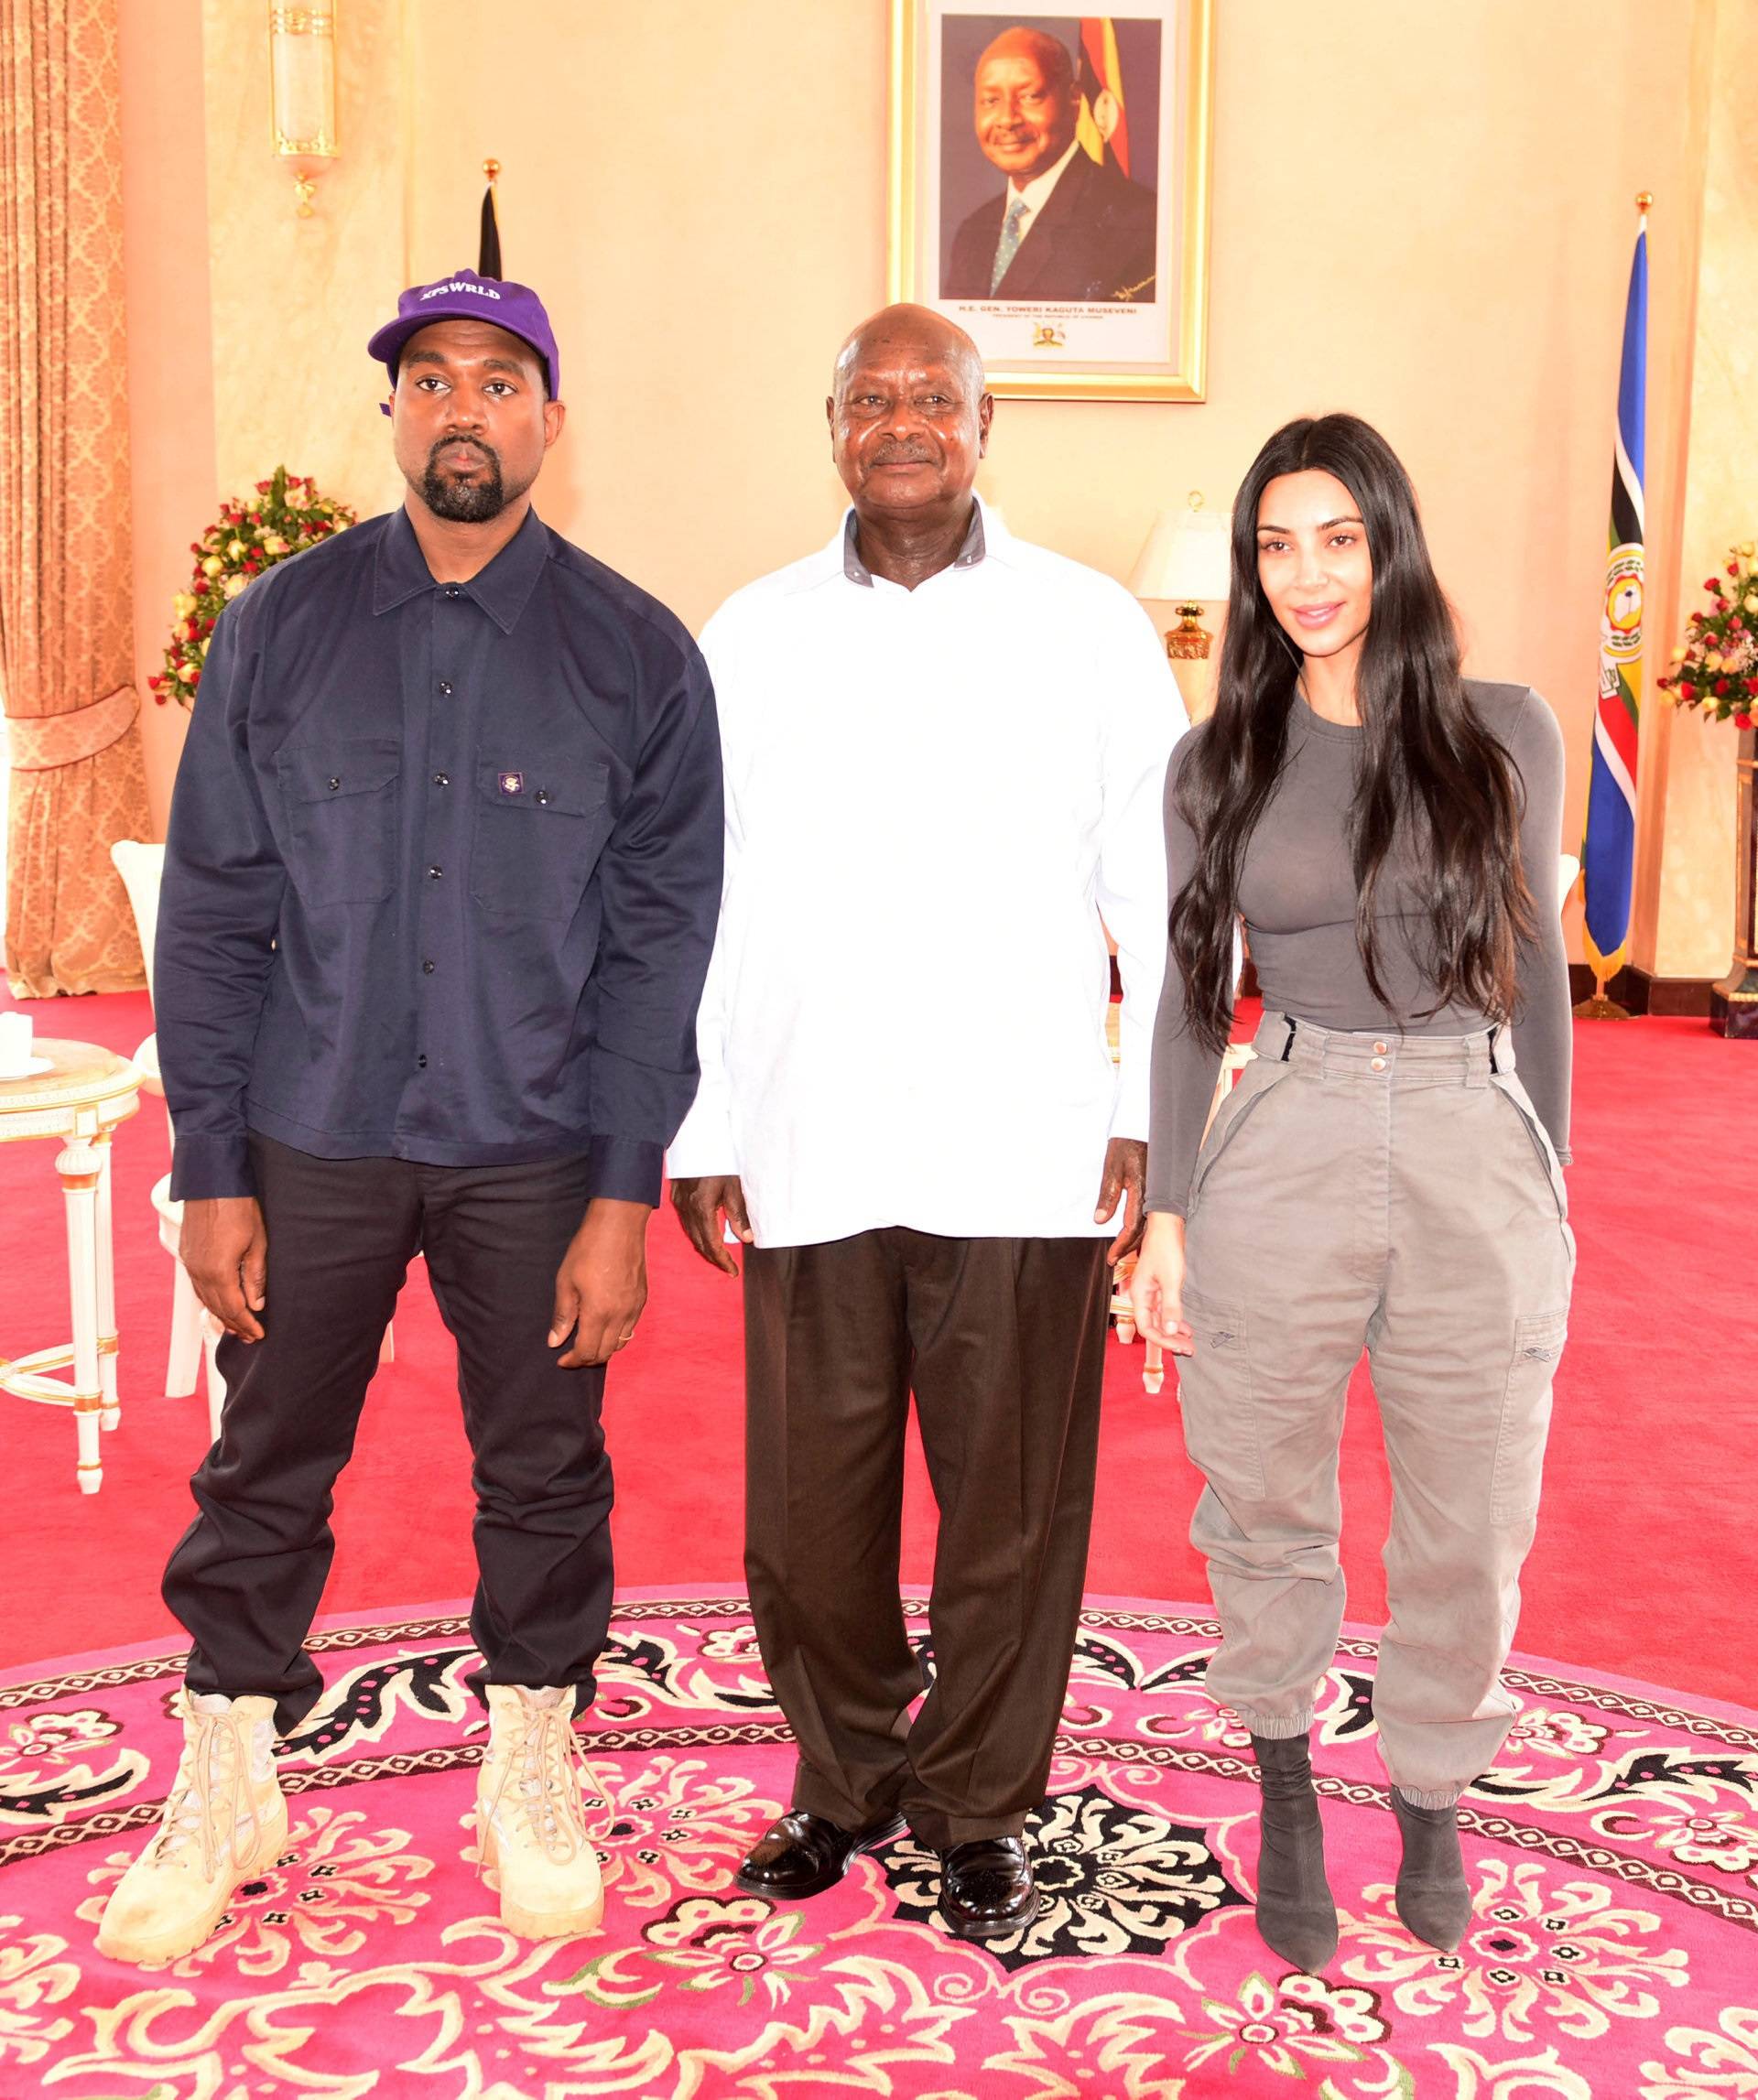 Rapper Kanye West and Kim Kardashian pose for a photograph with Uganda's President Yoweri Museveni when they paid a courtesy call at State House, Entebbe